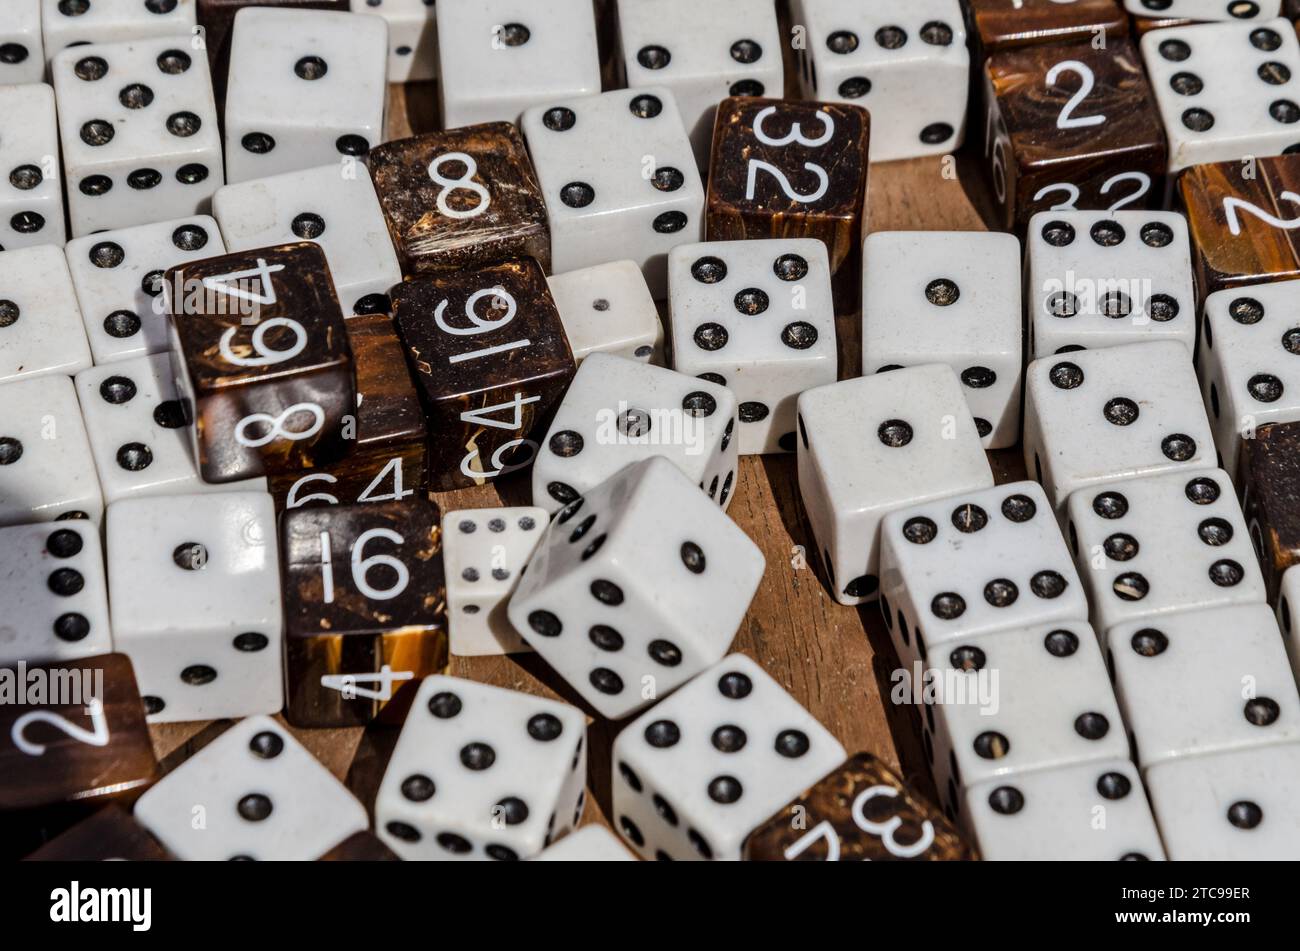 Dice for sale at Hells Kitchen flea market in New York City Stock Photo